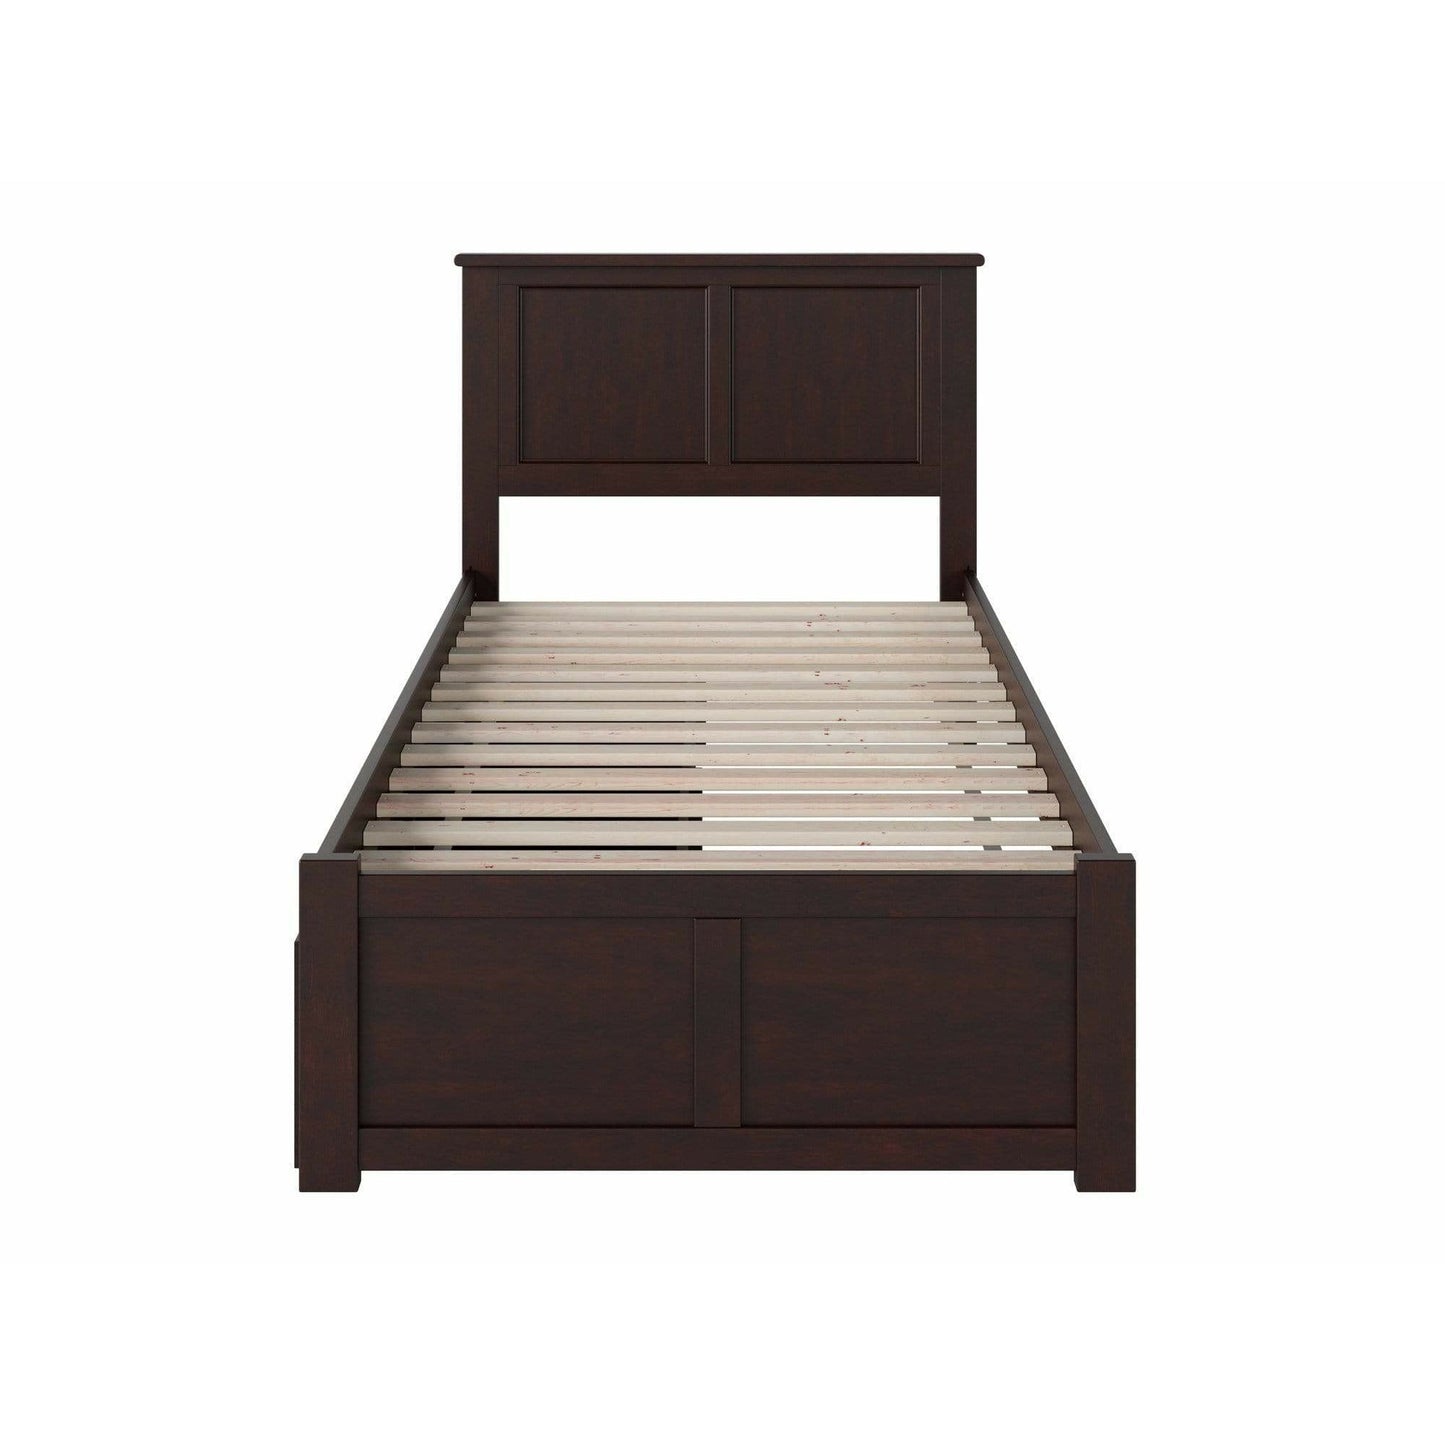 Atlantic Furniture Bed Madison Twin XL Platform Bed with Flat Panel Foot Board and 2 Urban Bed Drawers in Espresso